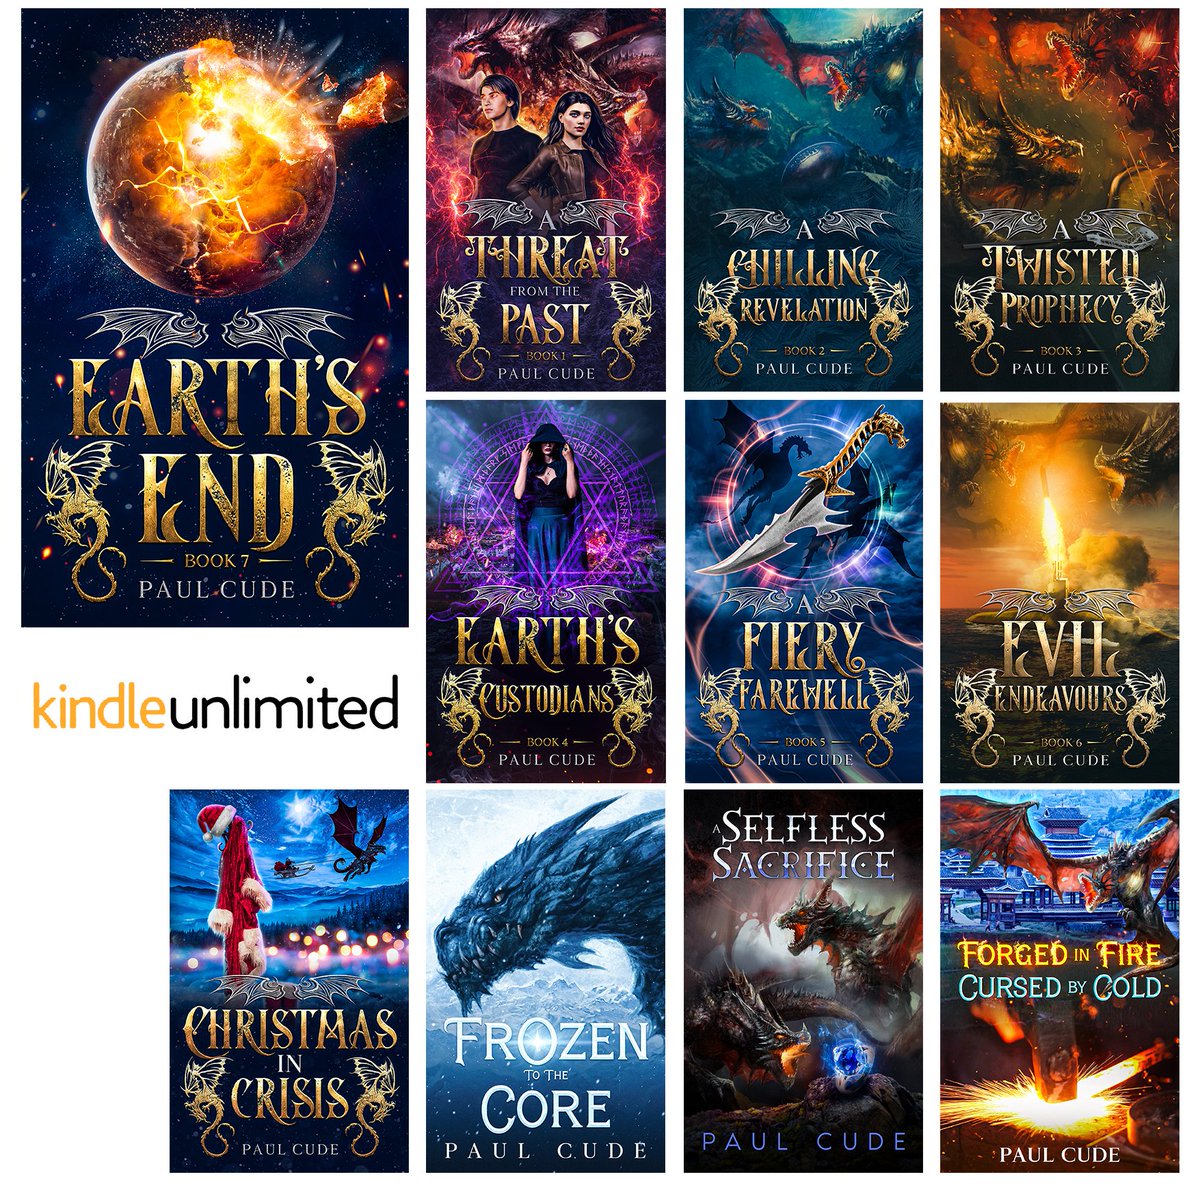 CHECK OUT this completed series jam-packed full of #DRAGONS & spanning 11 books mybook.to/ThreatFromTheP… #fantasyreads #fantasy #KU #fantasybookseries #fantasyseries #fantasynovel #fantasycreature #fantasybooks #indiebooks #Bookish #booknerd #booklover #ReadIndie #bookworms #SFF